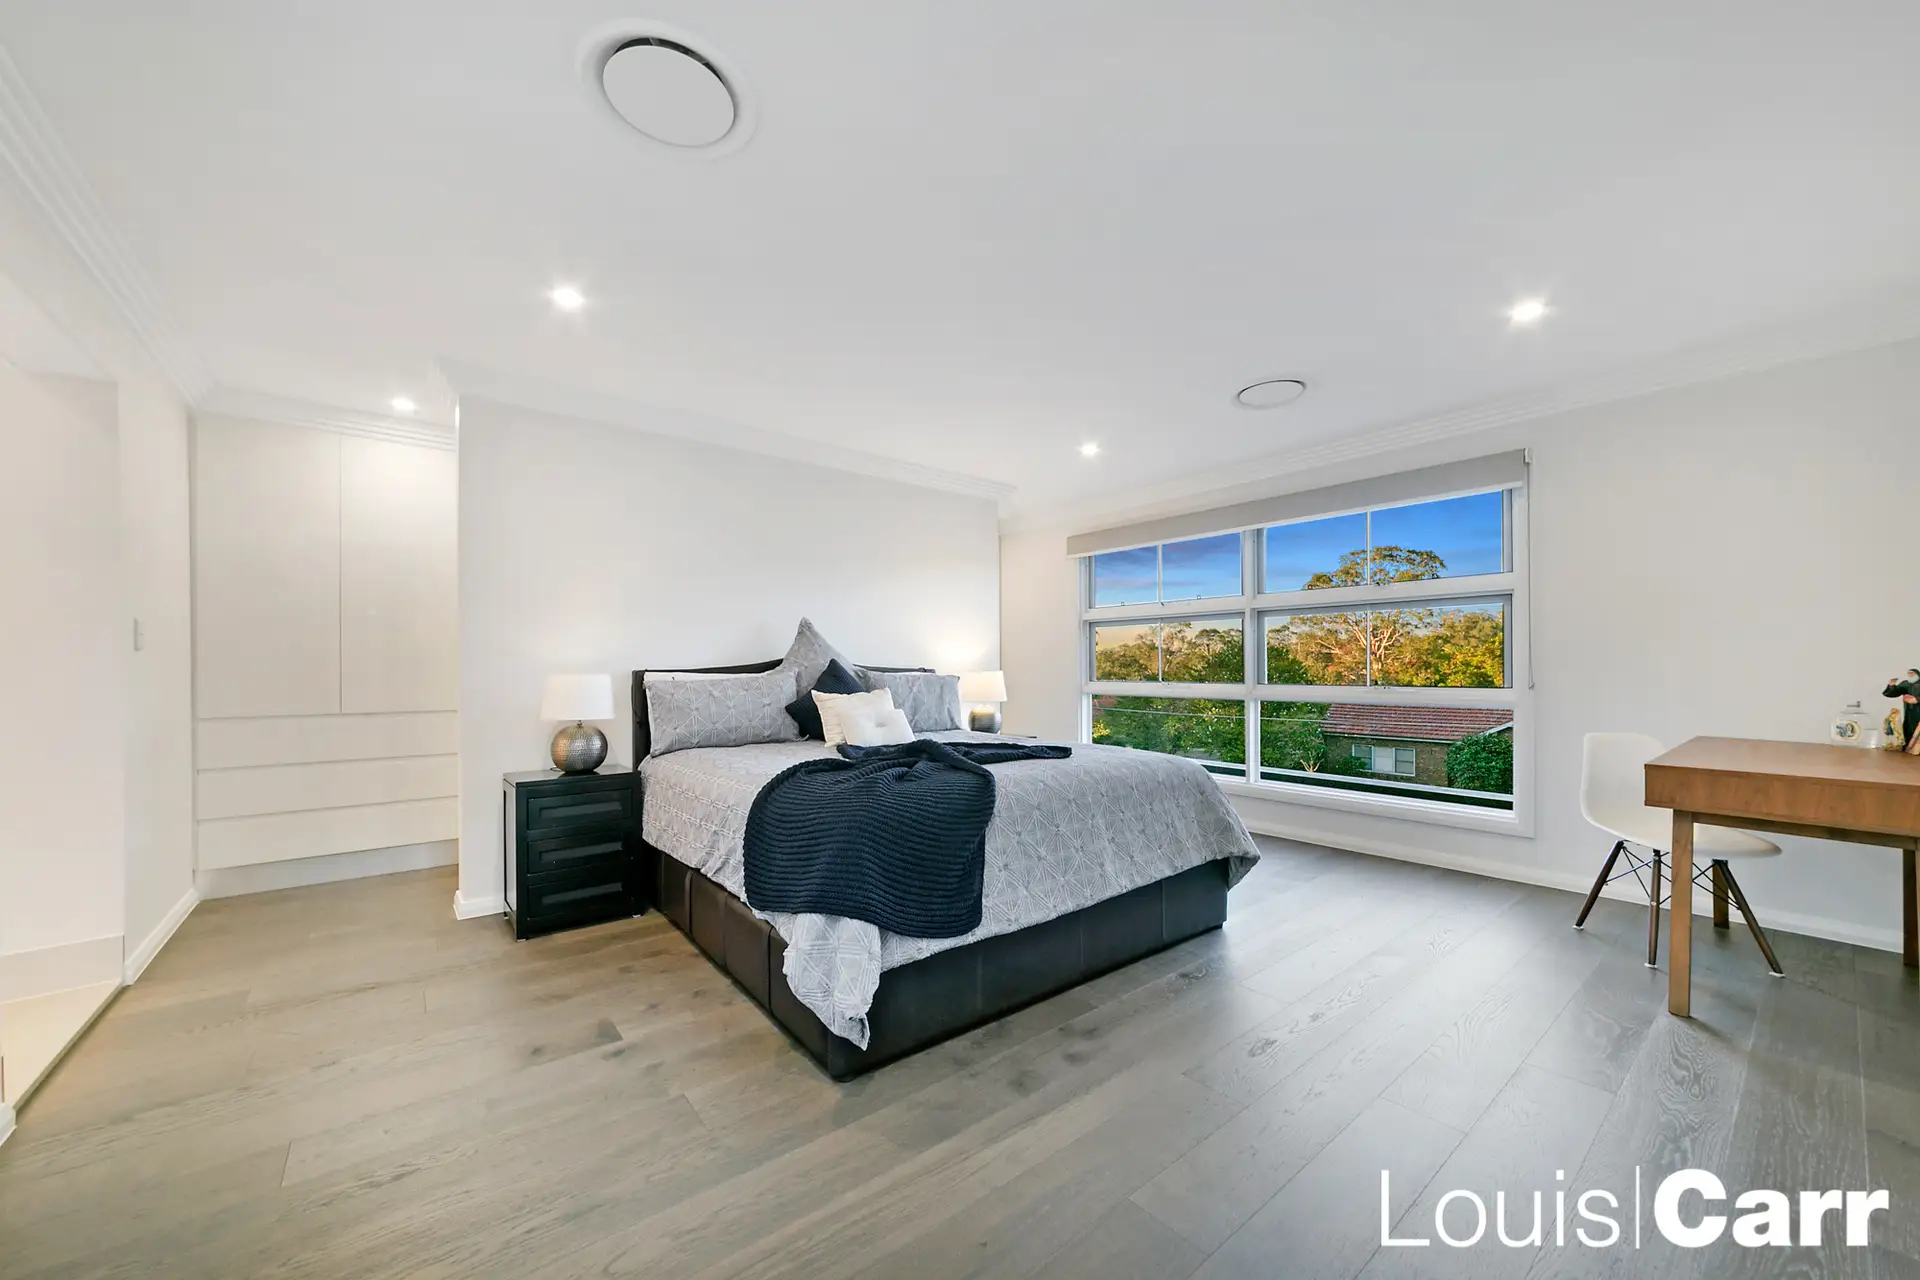 Photo #6: 31 Fairburn Avenue, West Pennant Hills - Sold by Louis Carr Real Estate